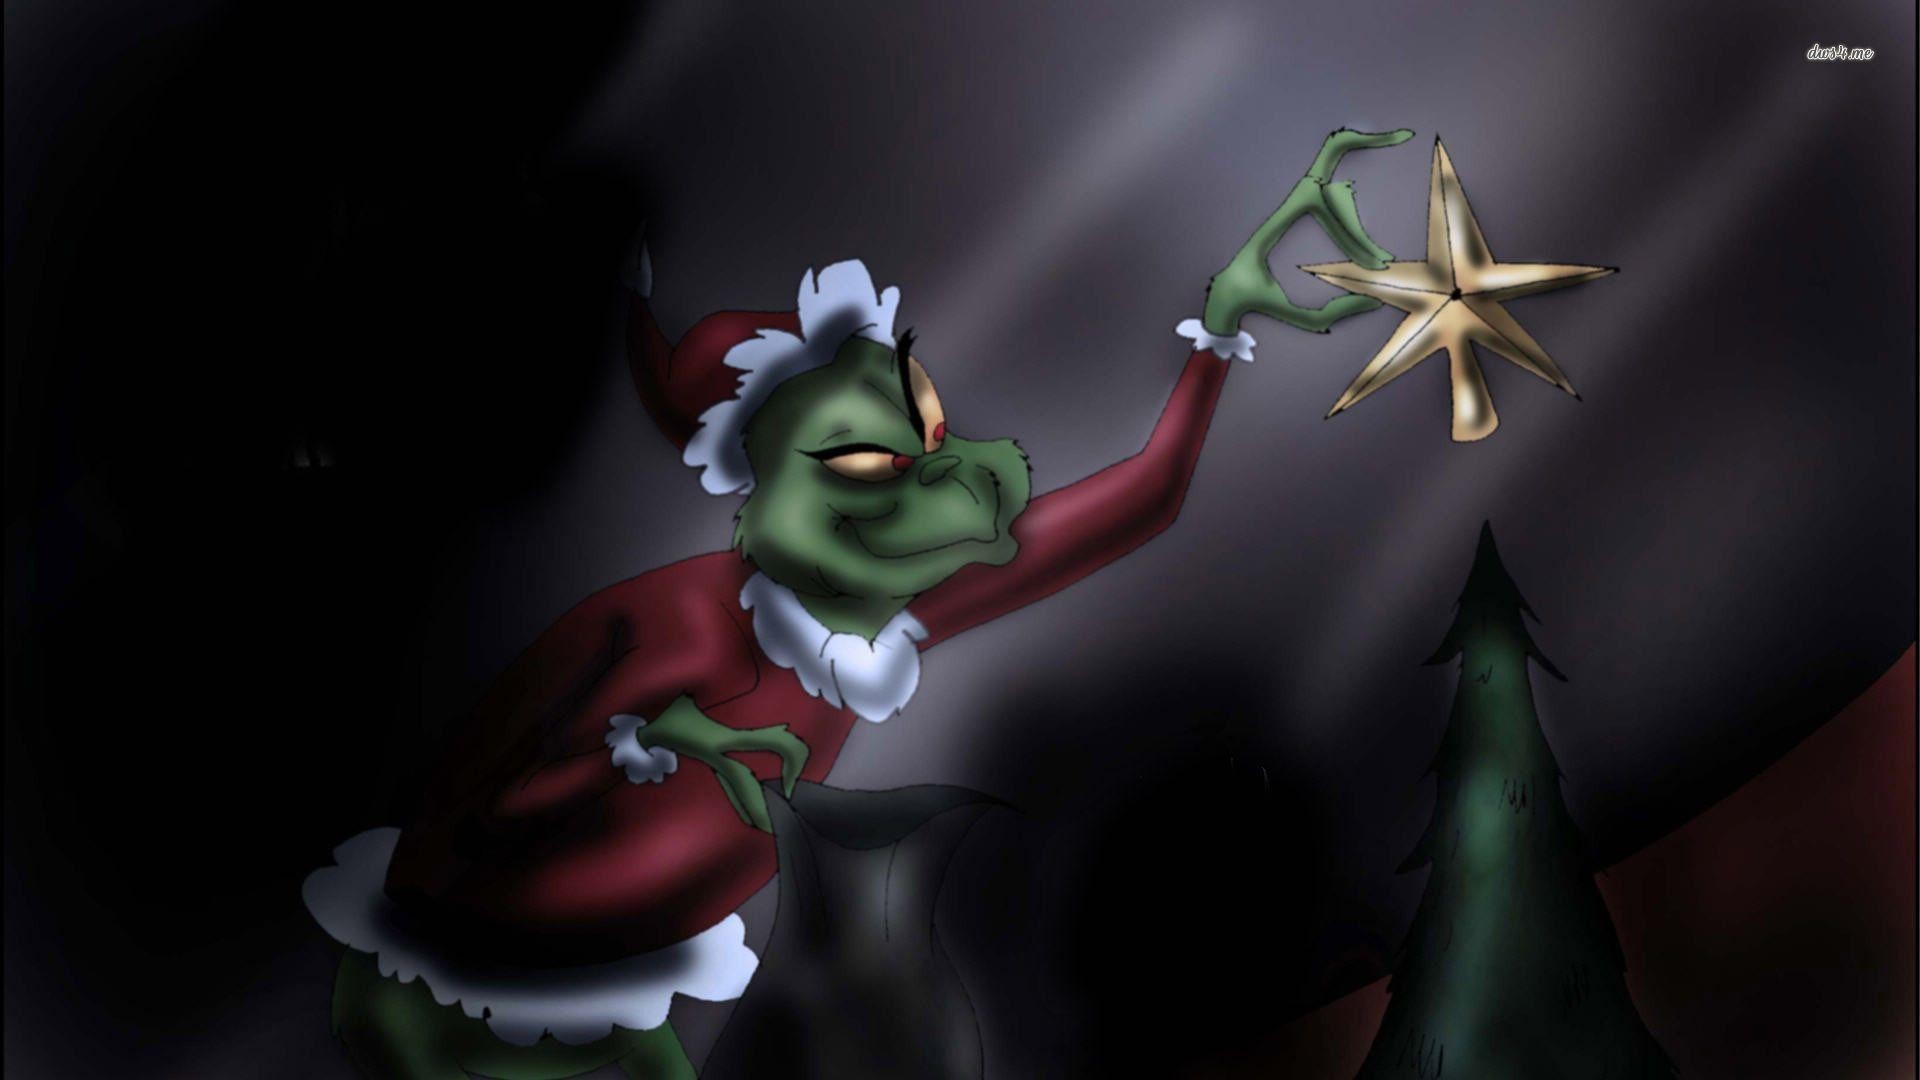 1920x1080 How the Grinch Stole Christmas wallpaper - Cartoon wallpapers - #